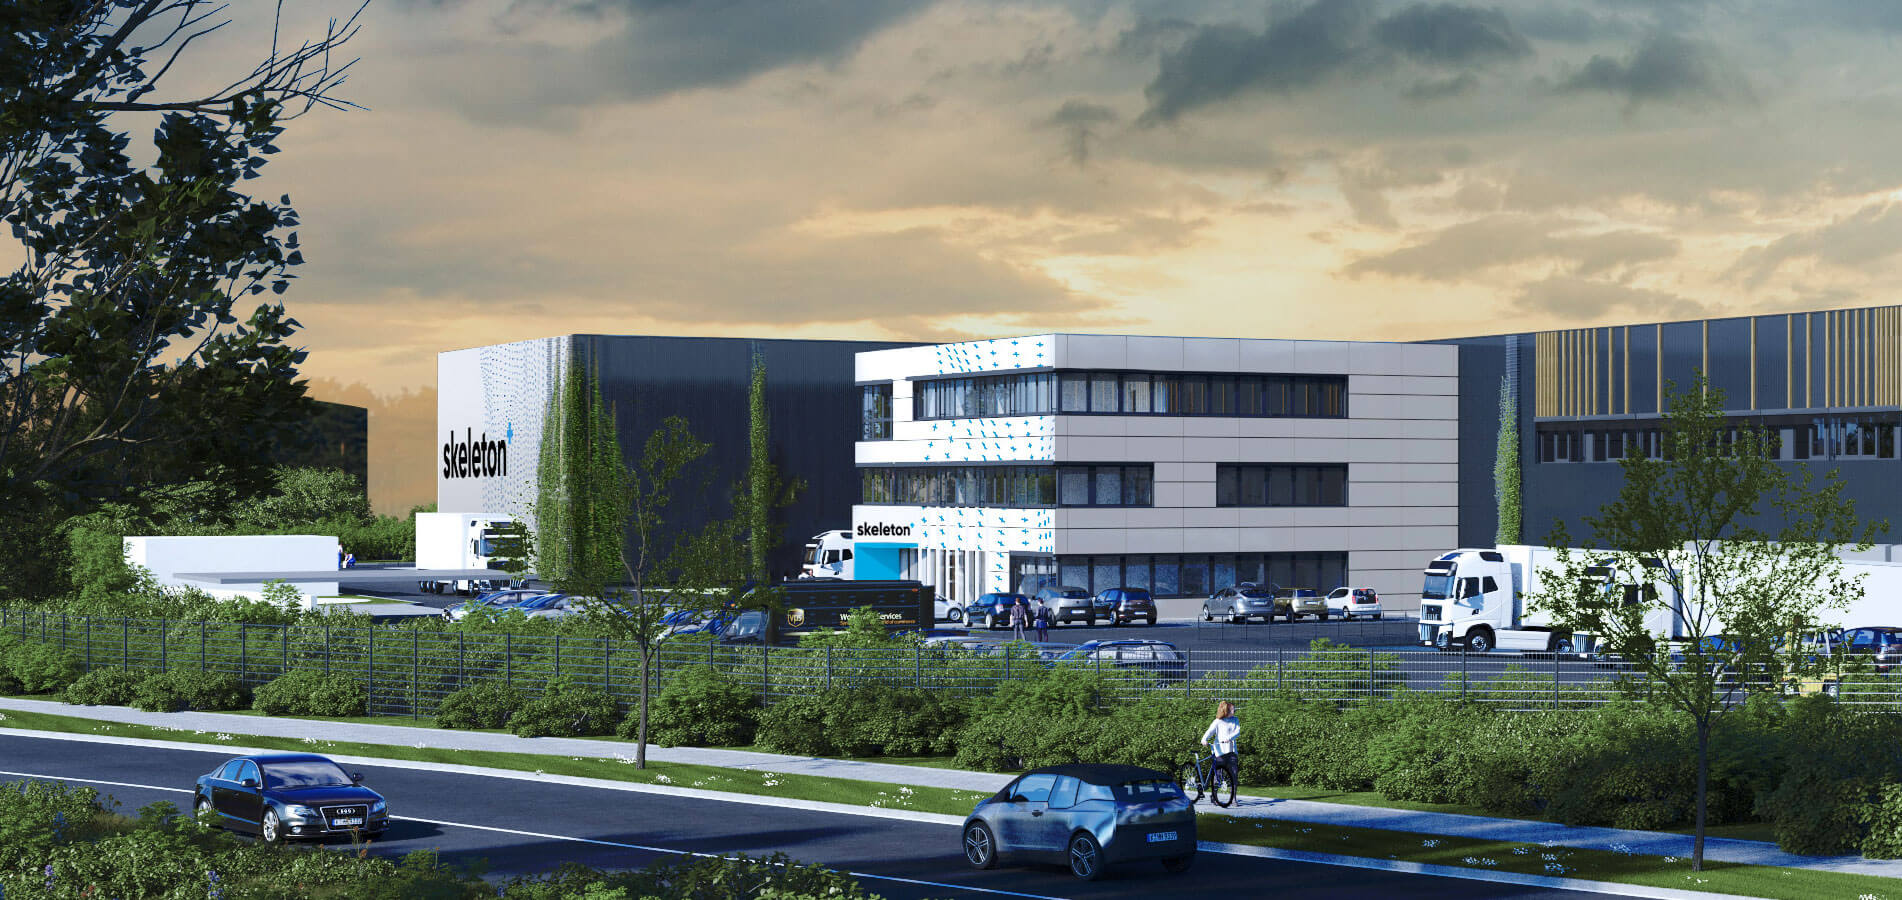 Skeleton invests 220 M EUR in Leipzig area to build the world’s largest supercapacitor factory in partnership with Siemens